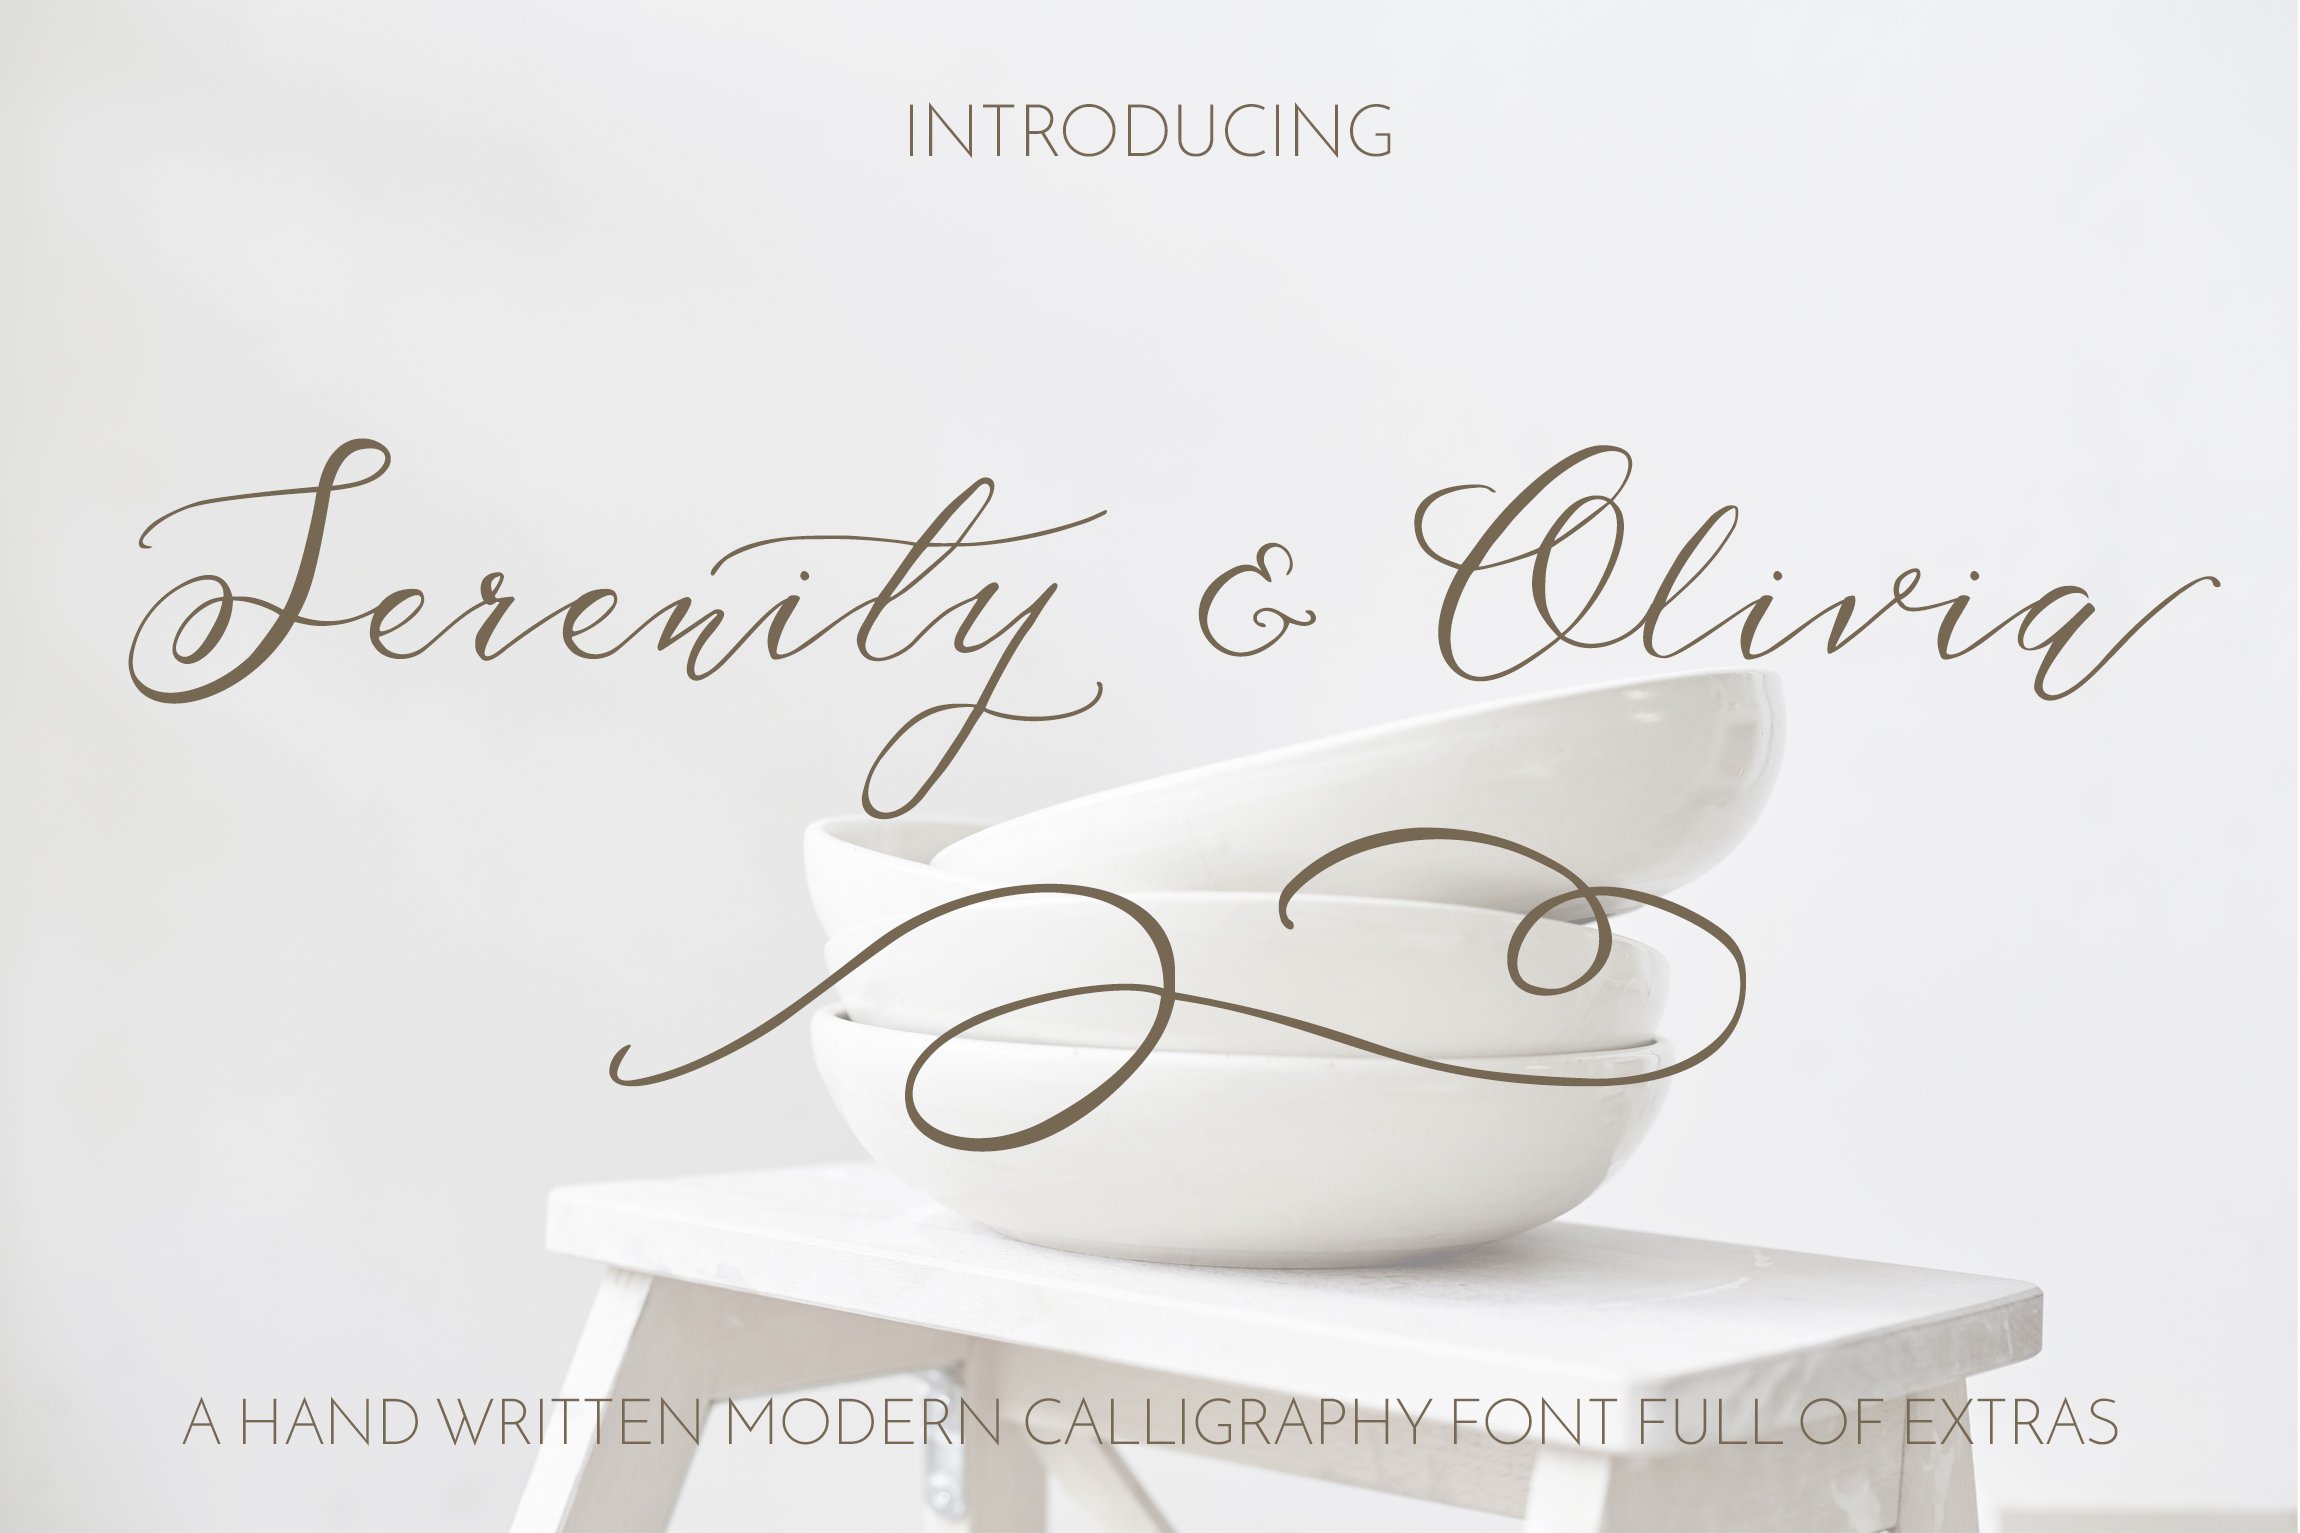 Serenity & Olivia Calligraphy Font cover image.